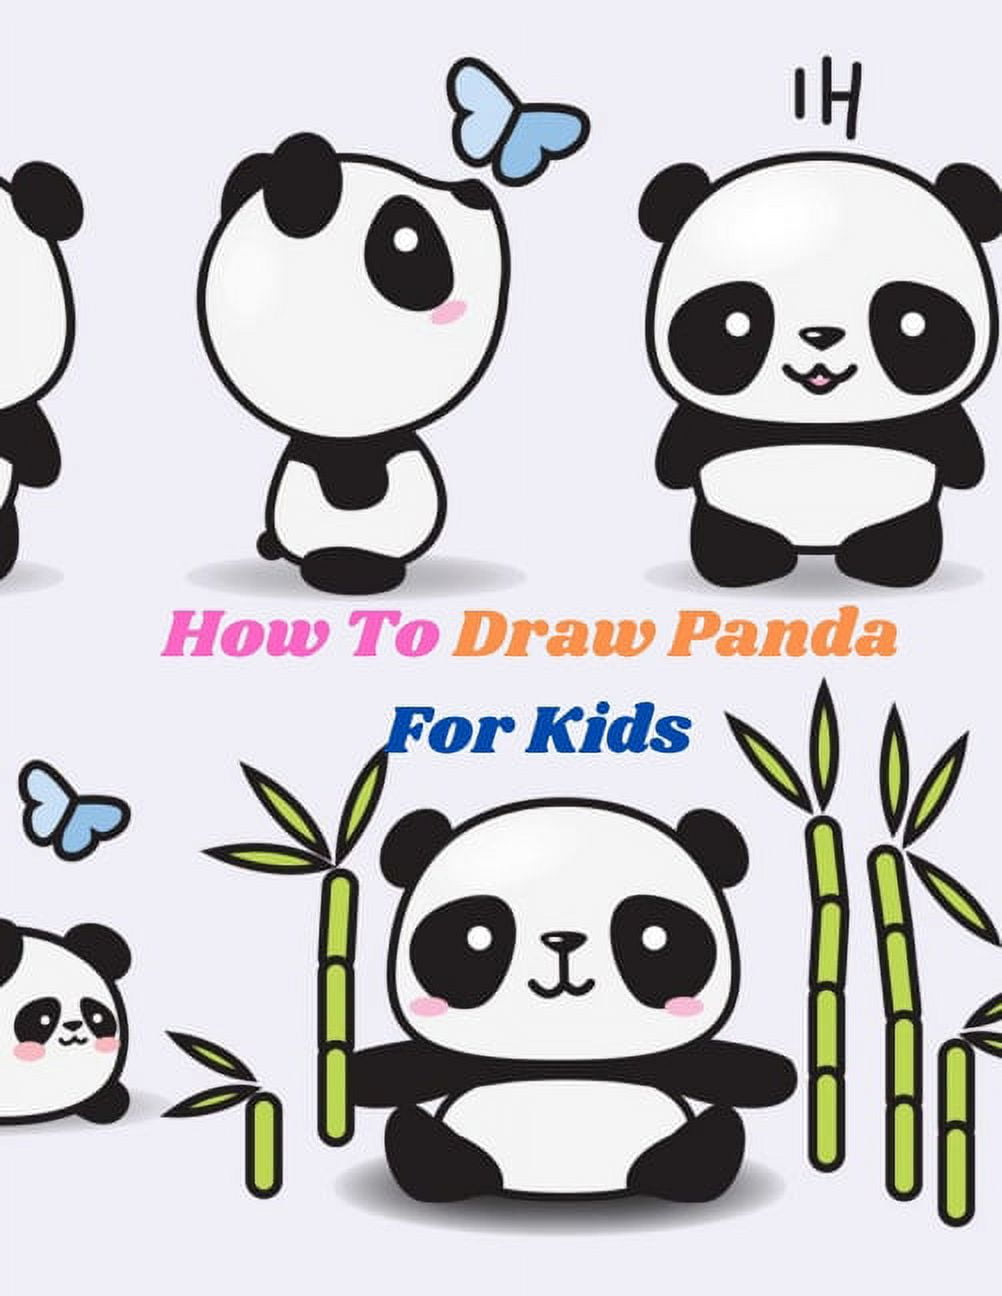 17 Favorite Easy Drawing Ideas for Kids - MentalUP